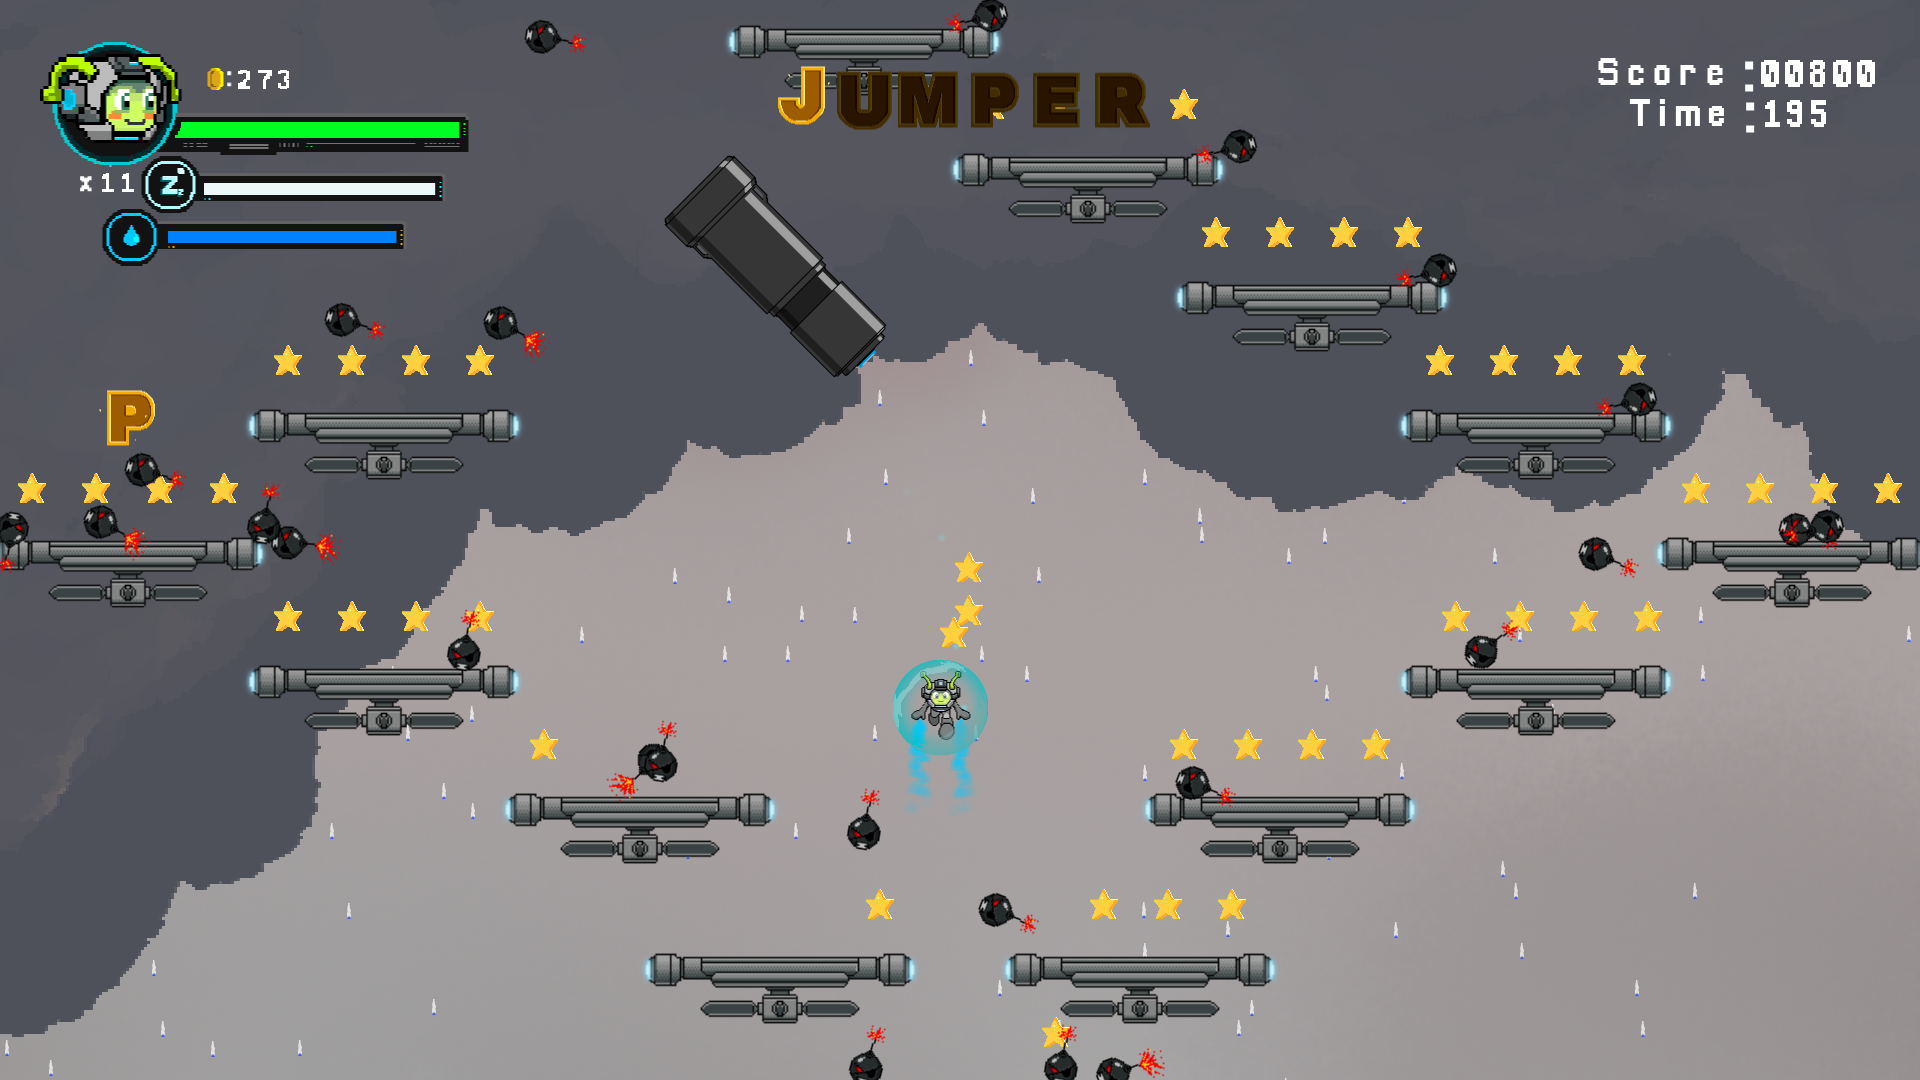 Jumper Starman Scape From the Blue Planet Screenshot 3